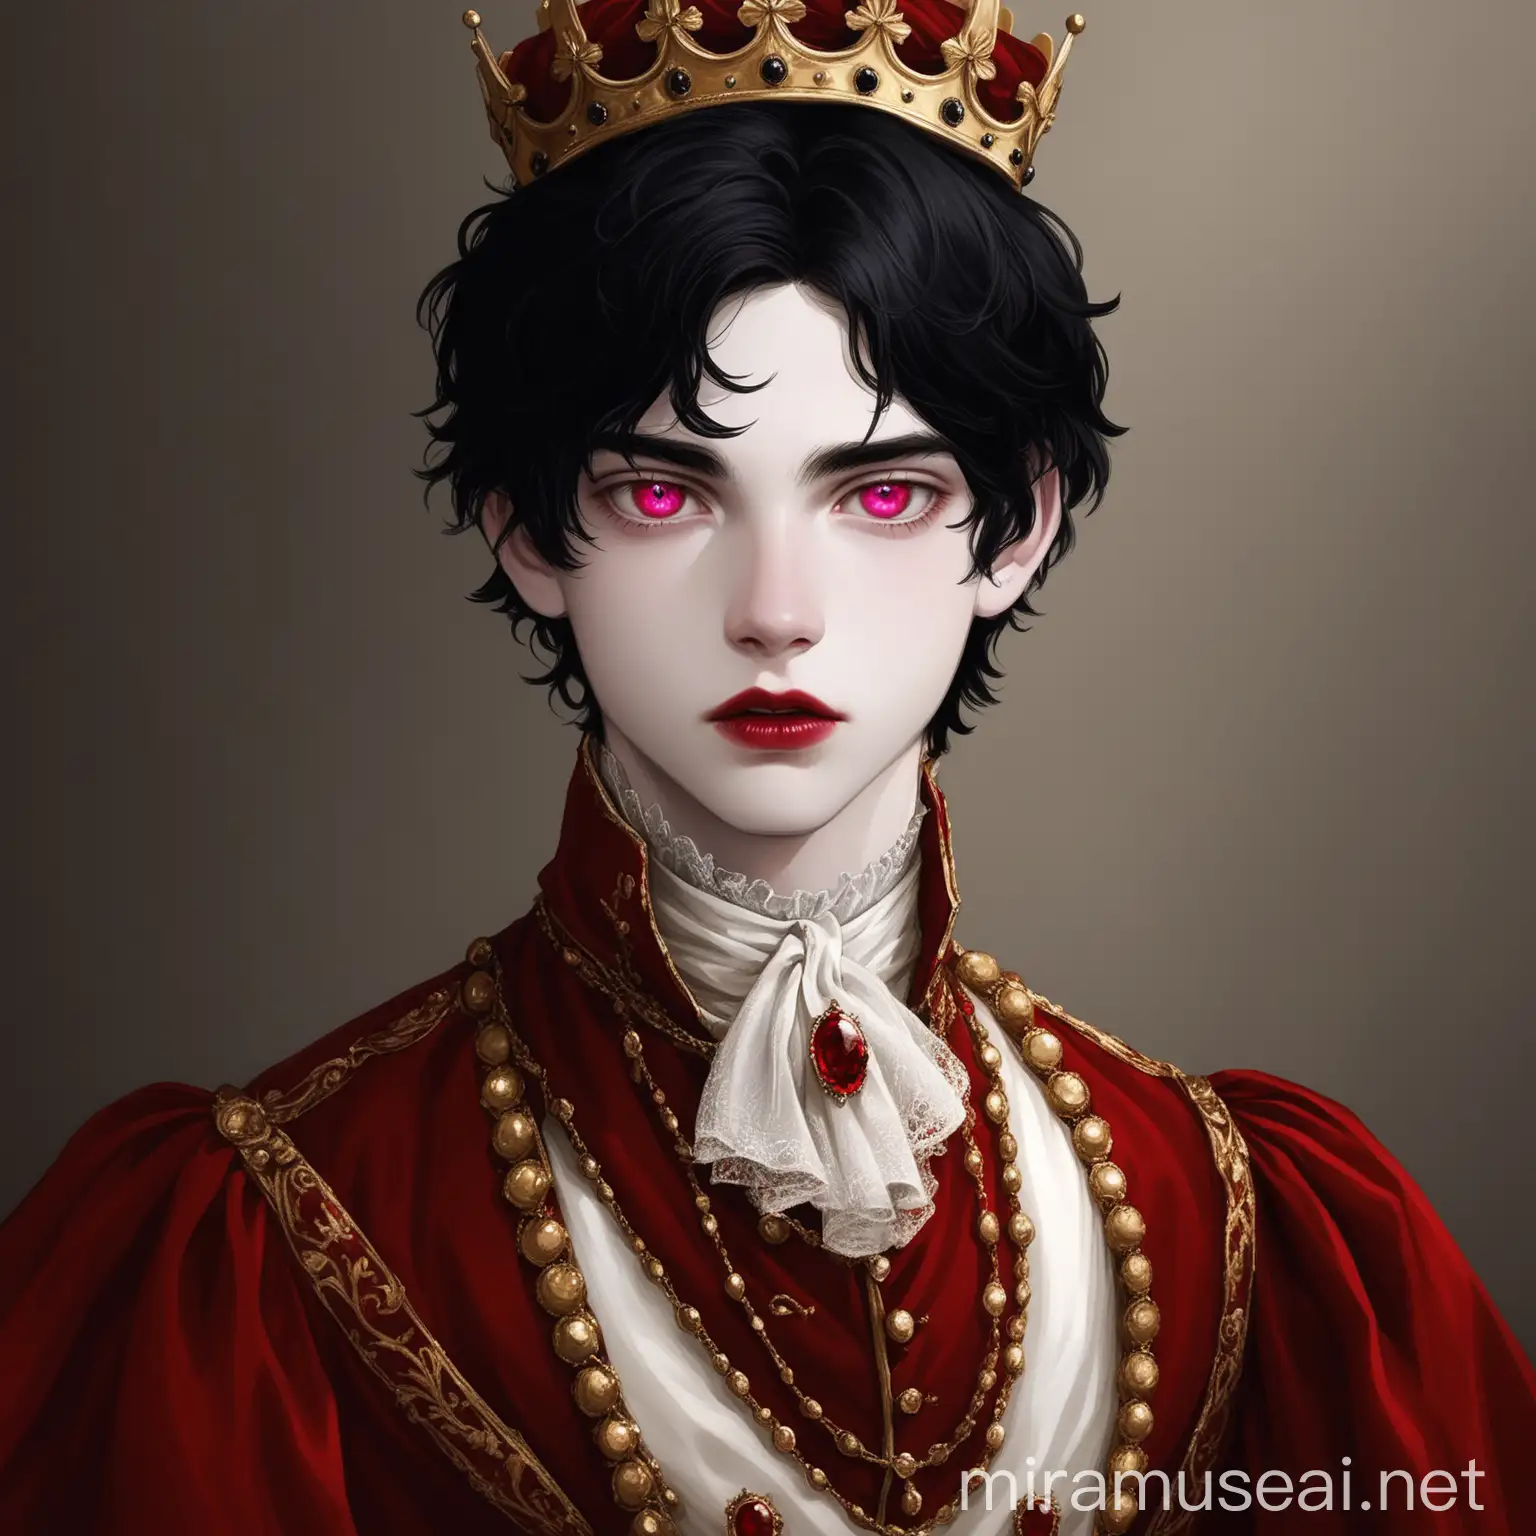 Young King with Royal Red and White Attire and Ruby Jewelry